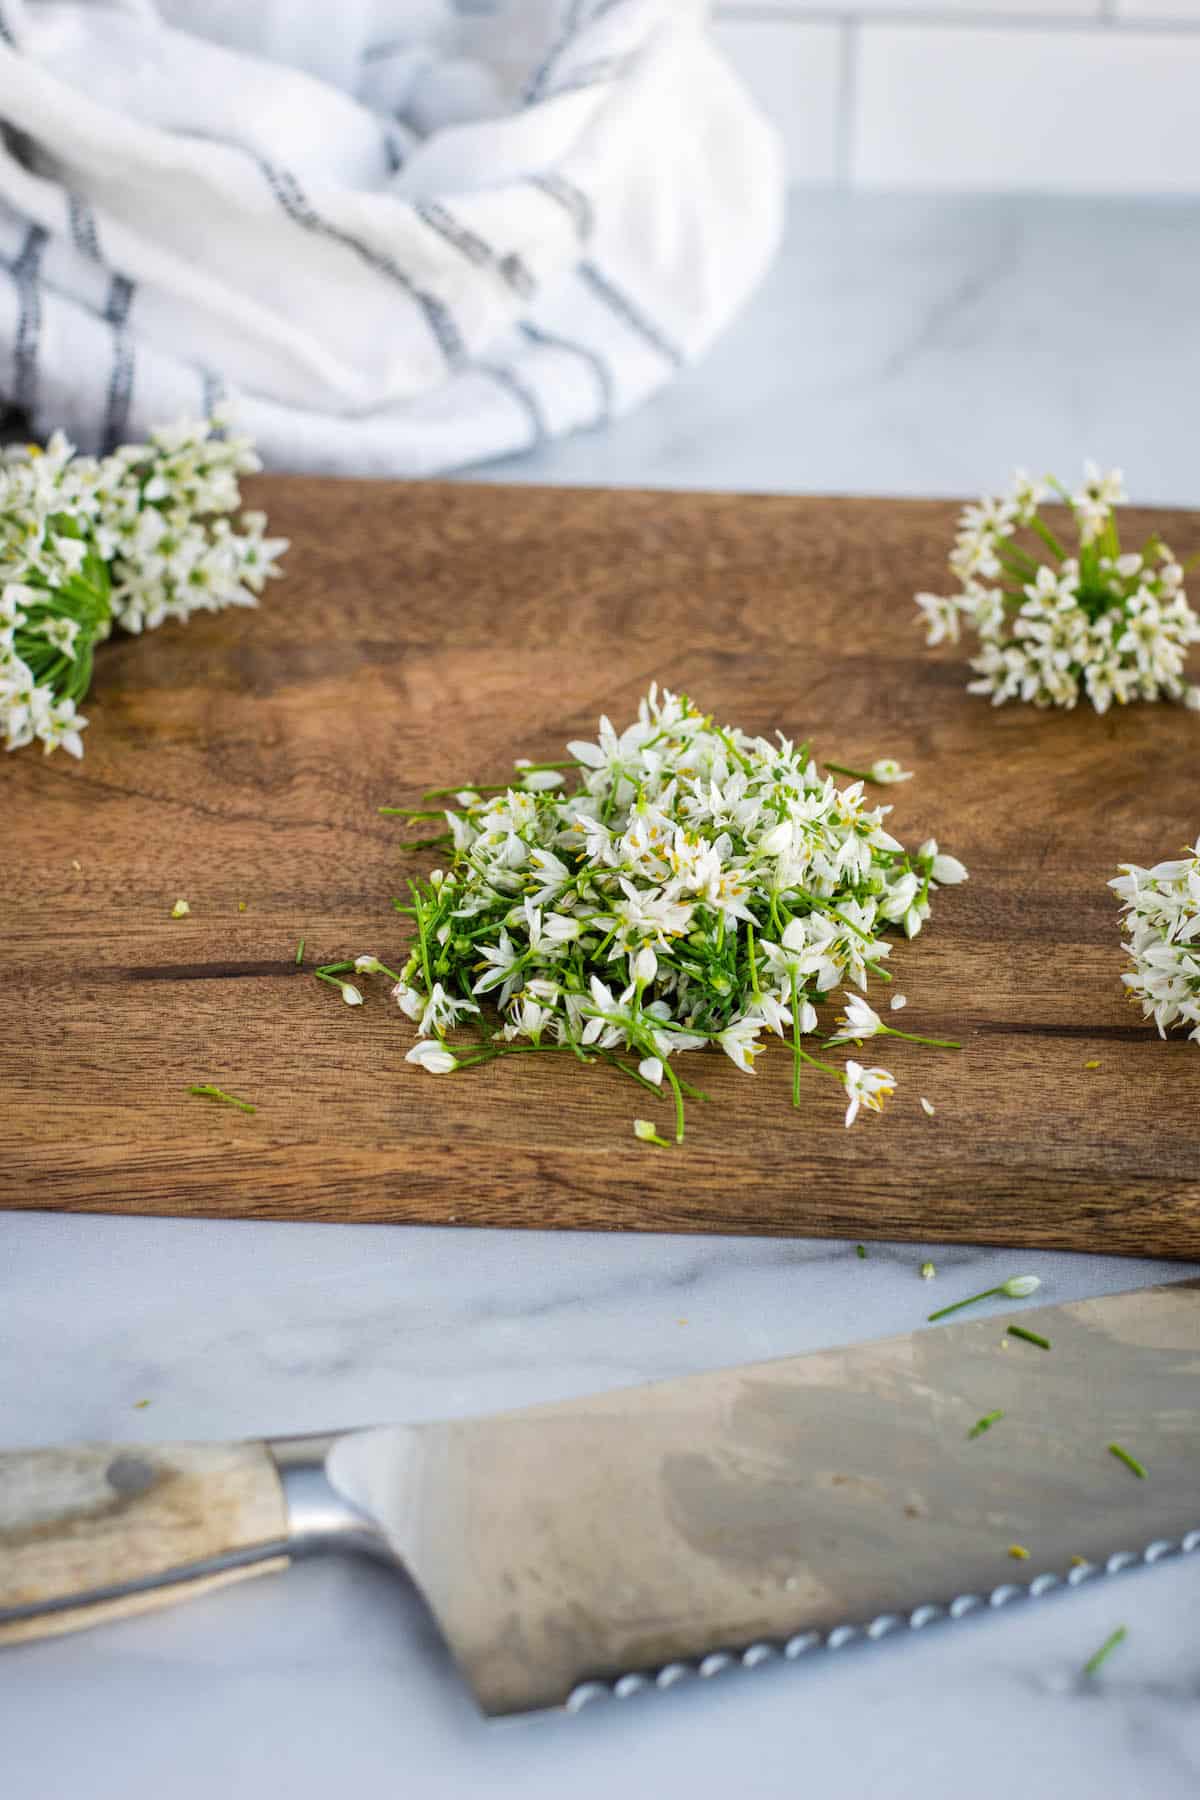 chopped garlic chive blossoms on a wooden cutting board.